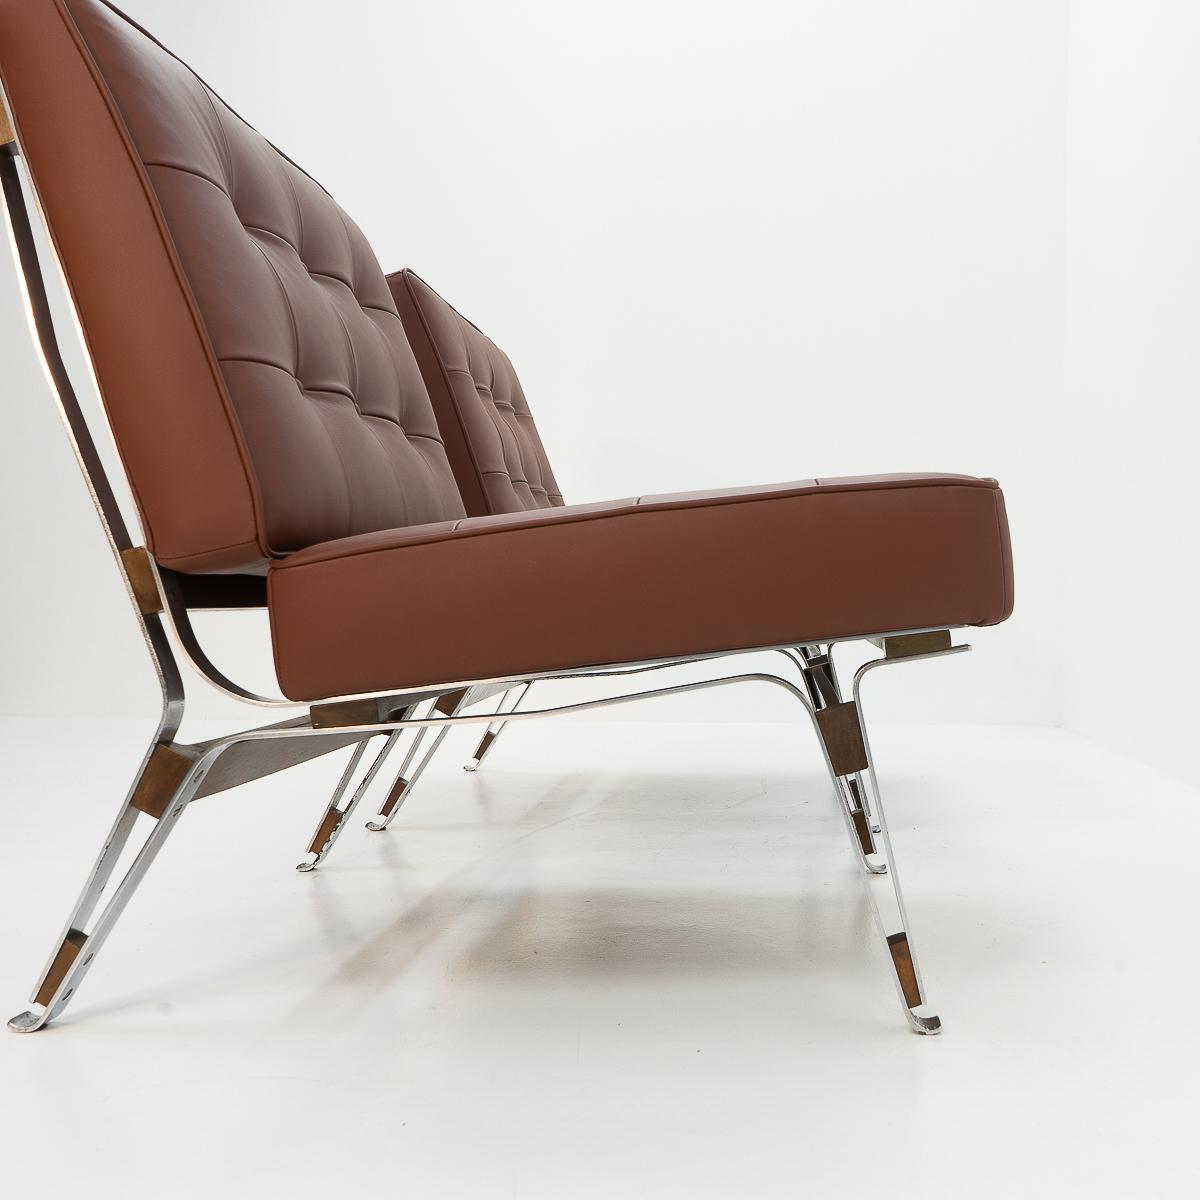 Rare Italian Design: Ico Parisi 856 Lounge Chairs for Cassina, 1950s For Sale 3